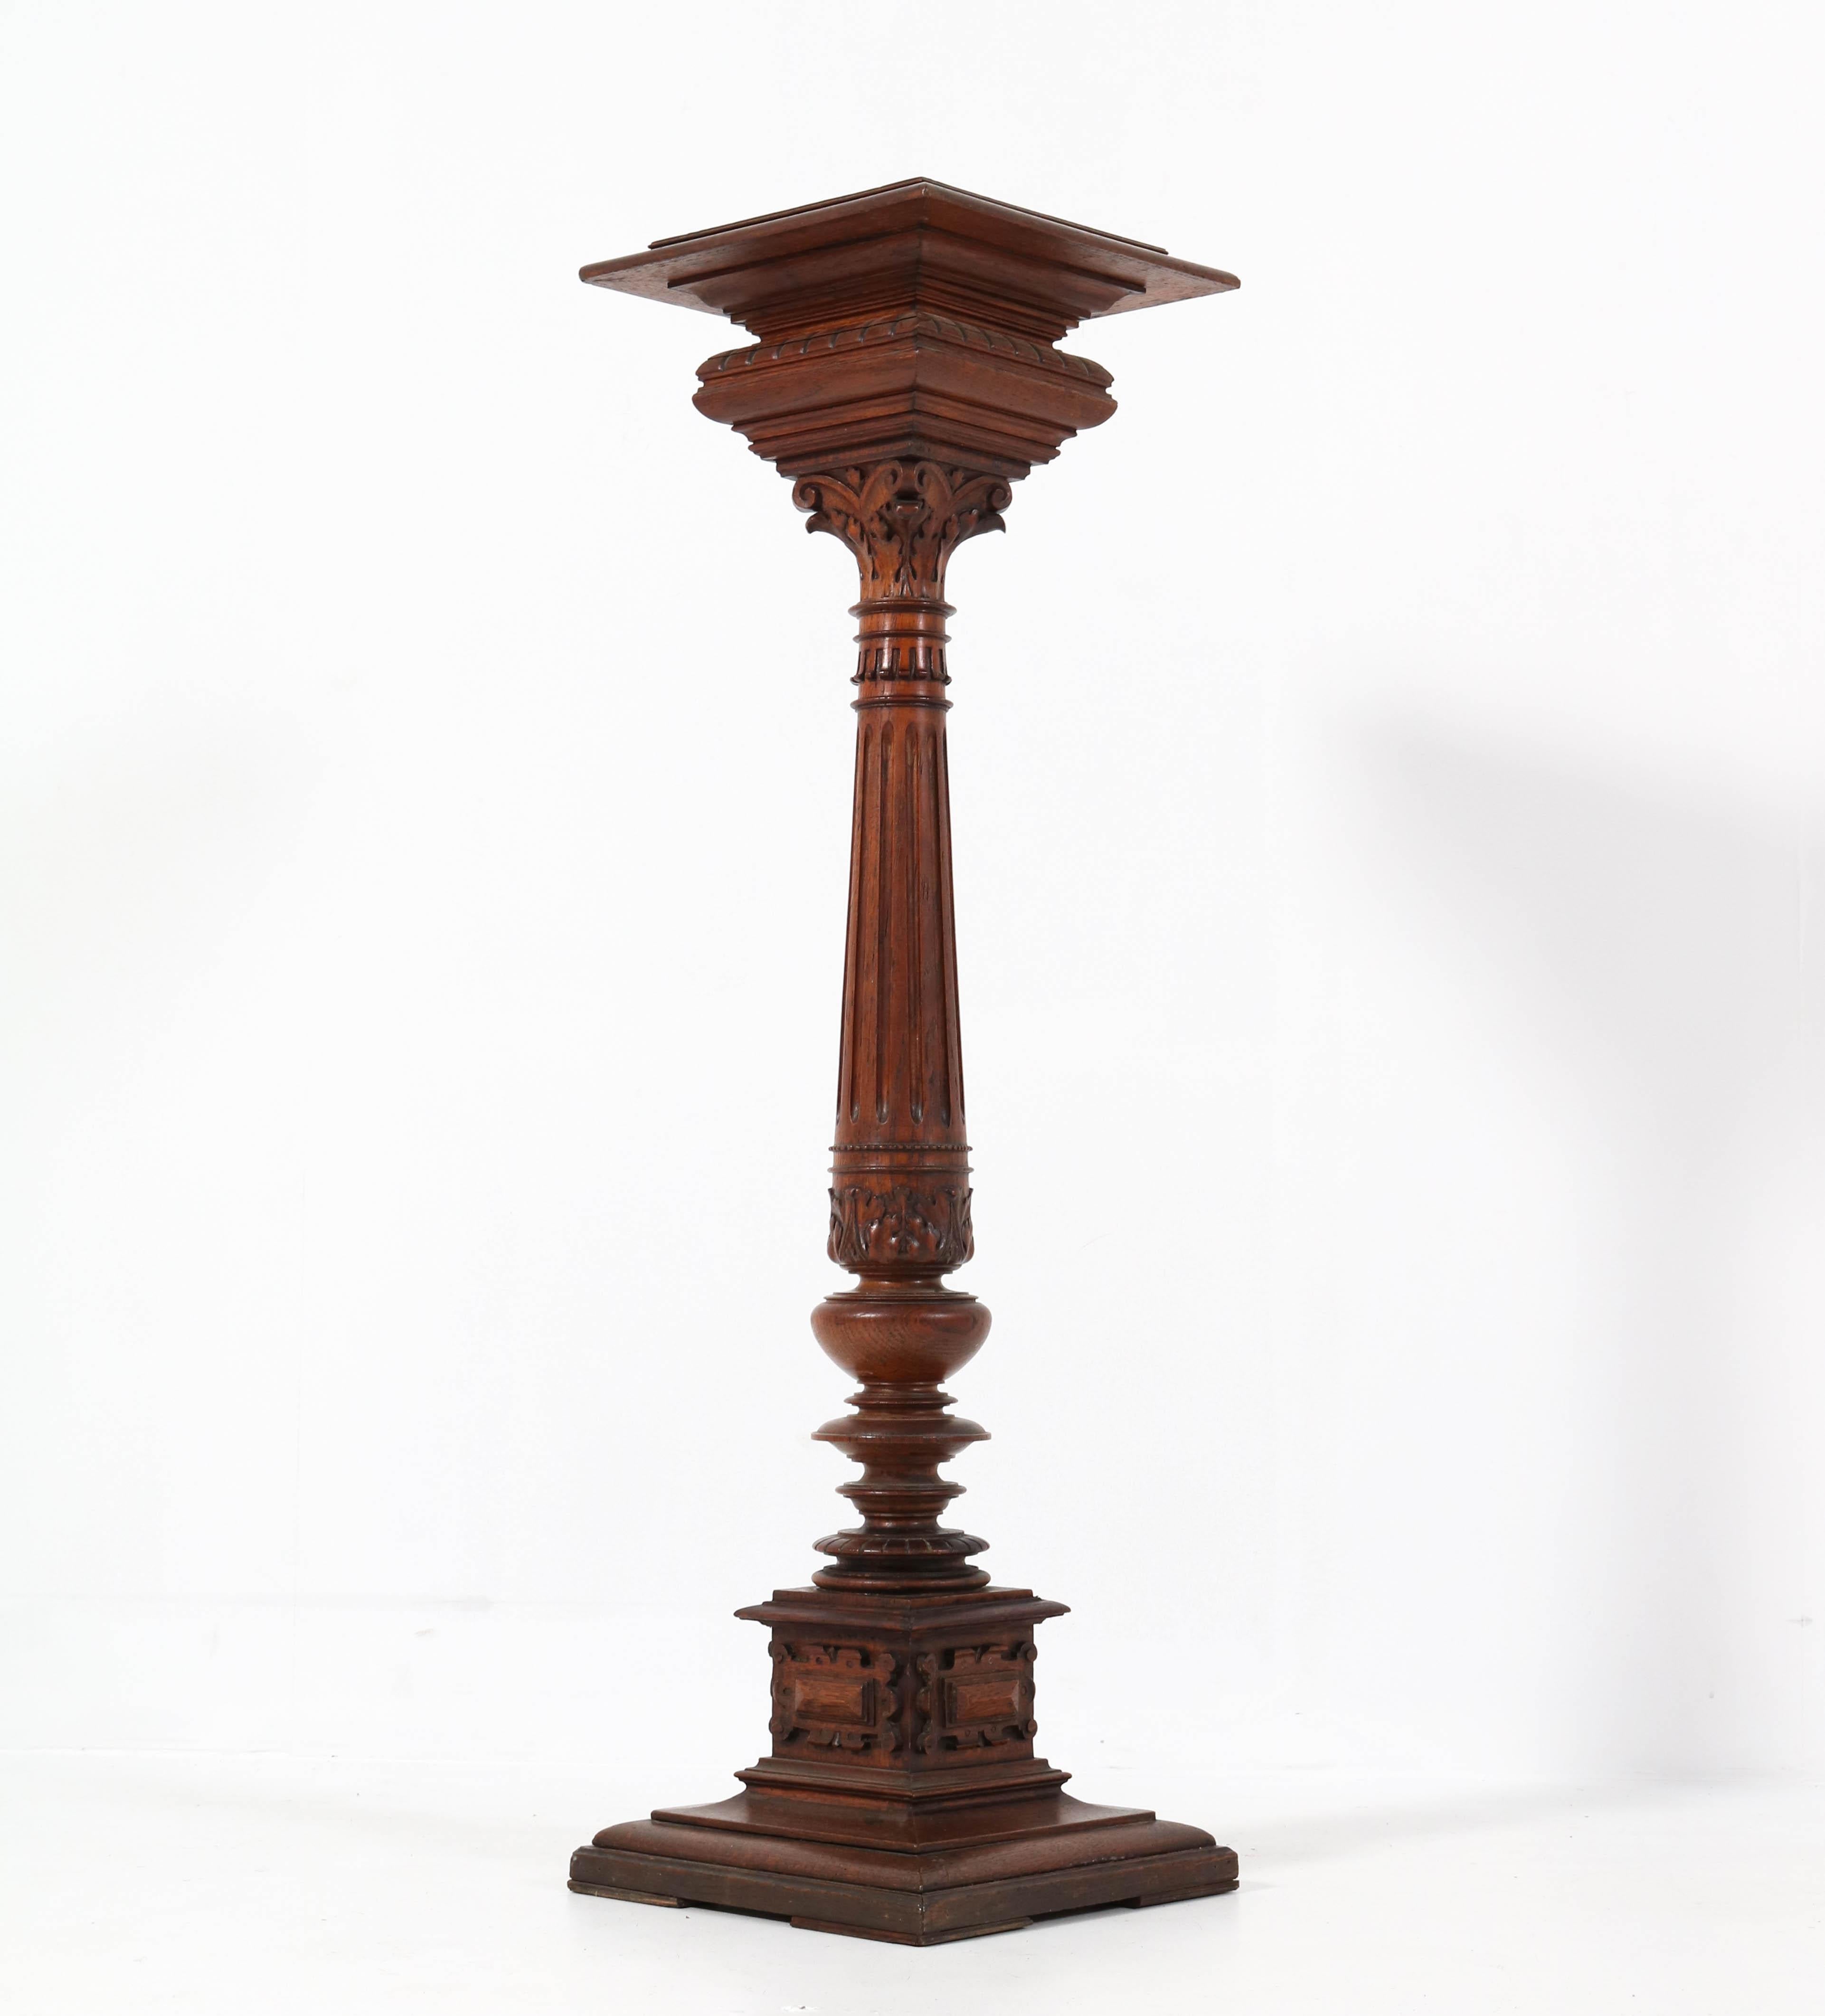 Wonderful Henri II pedestal table.
Striking French design from the 1900s.
Solid oak base with hand-carved details.
In very good original condition with a beautiful patina.